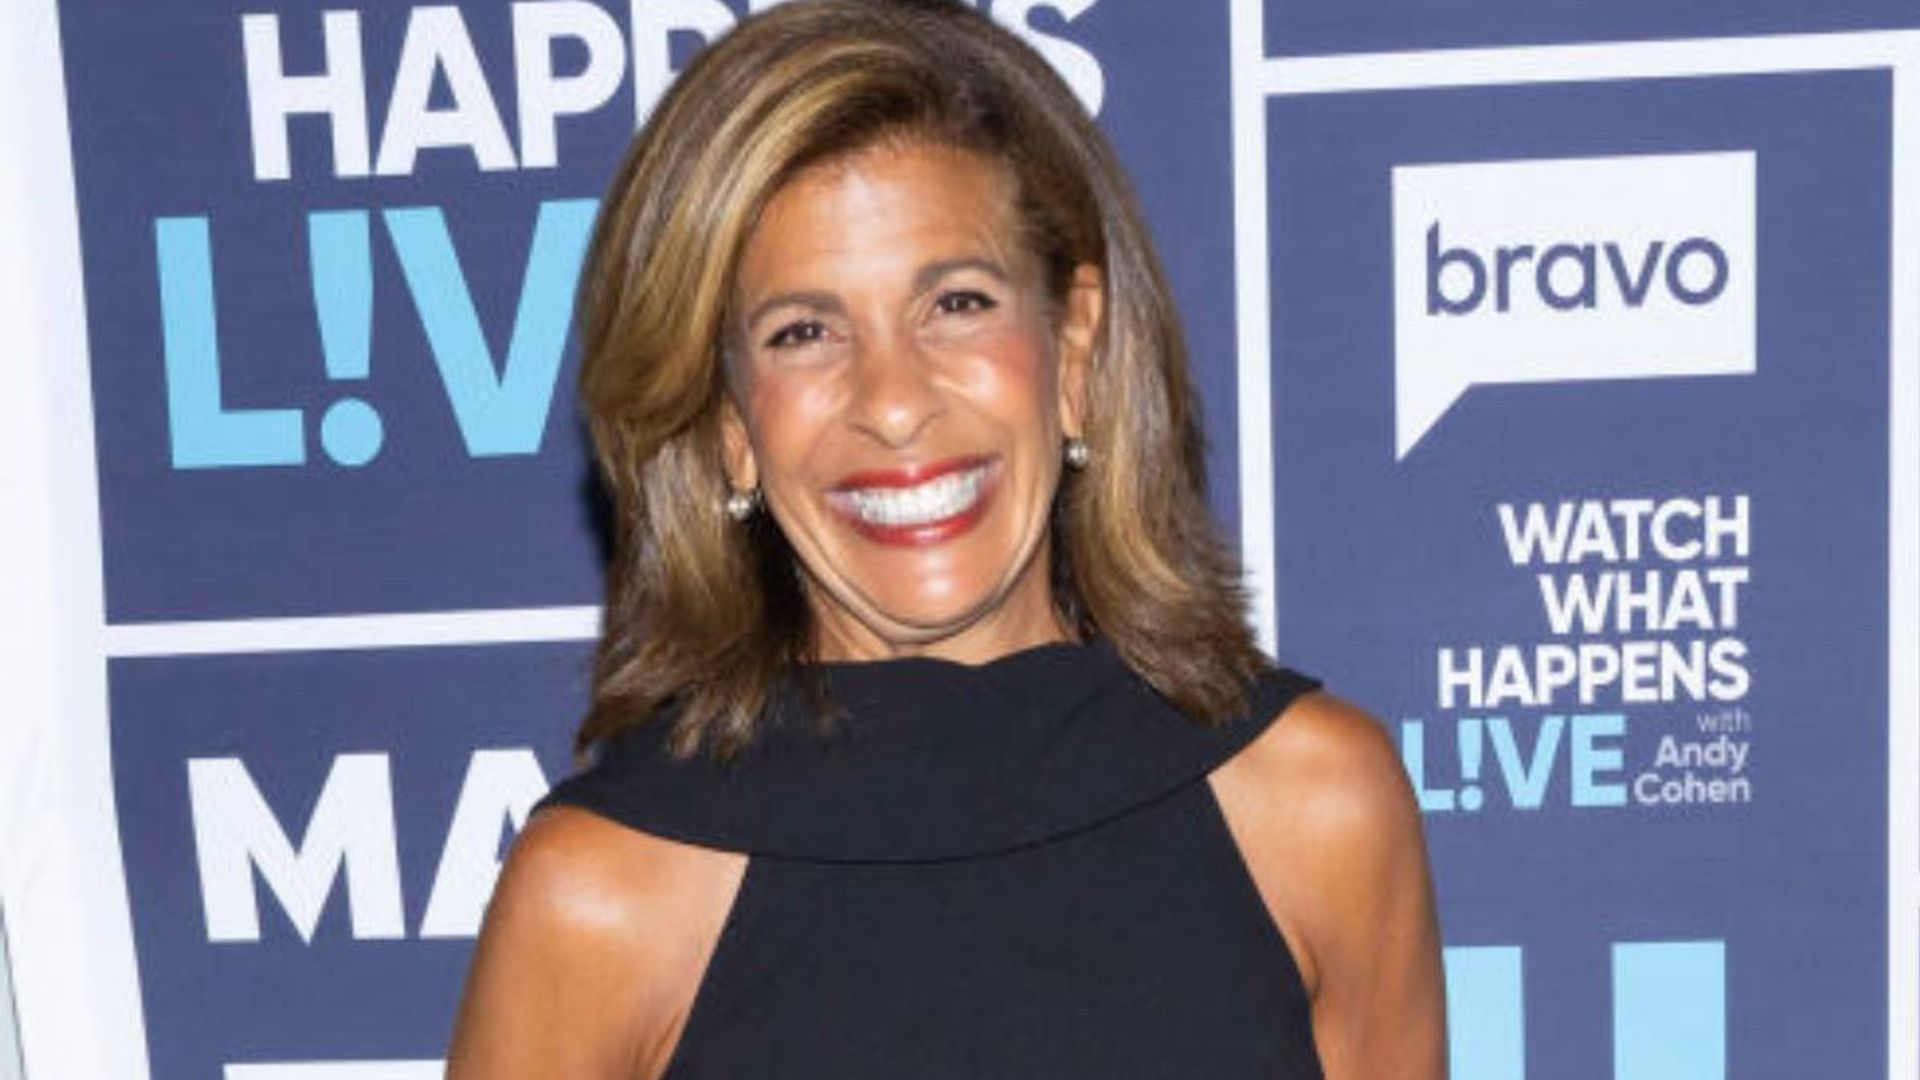 Hoda Kotb's two children steal the show in the cutest Christmas photos